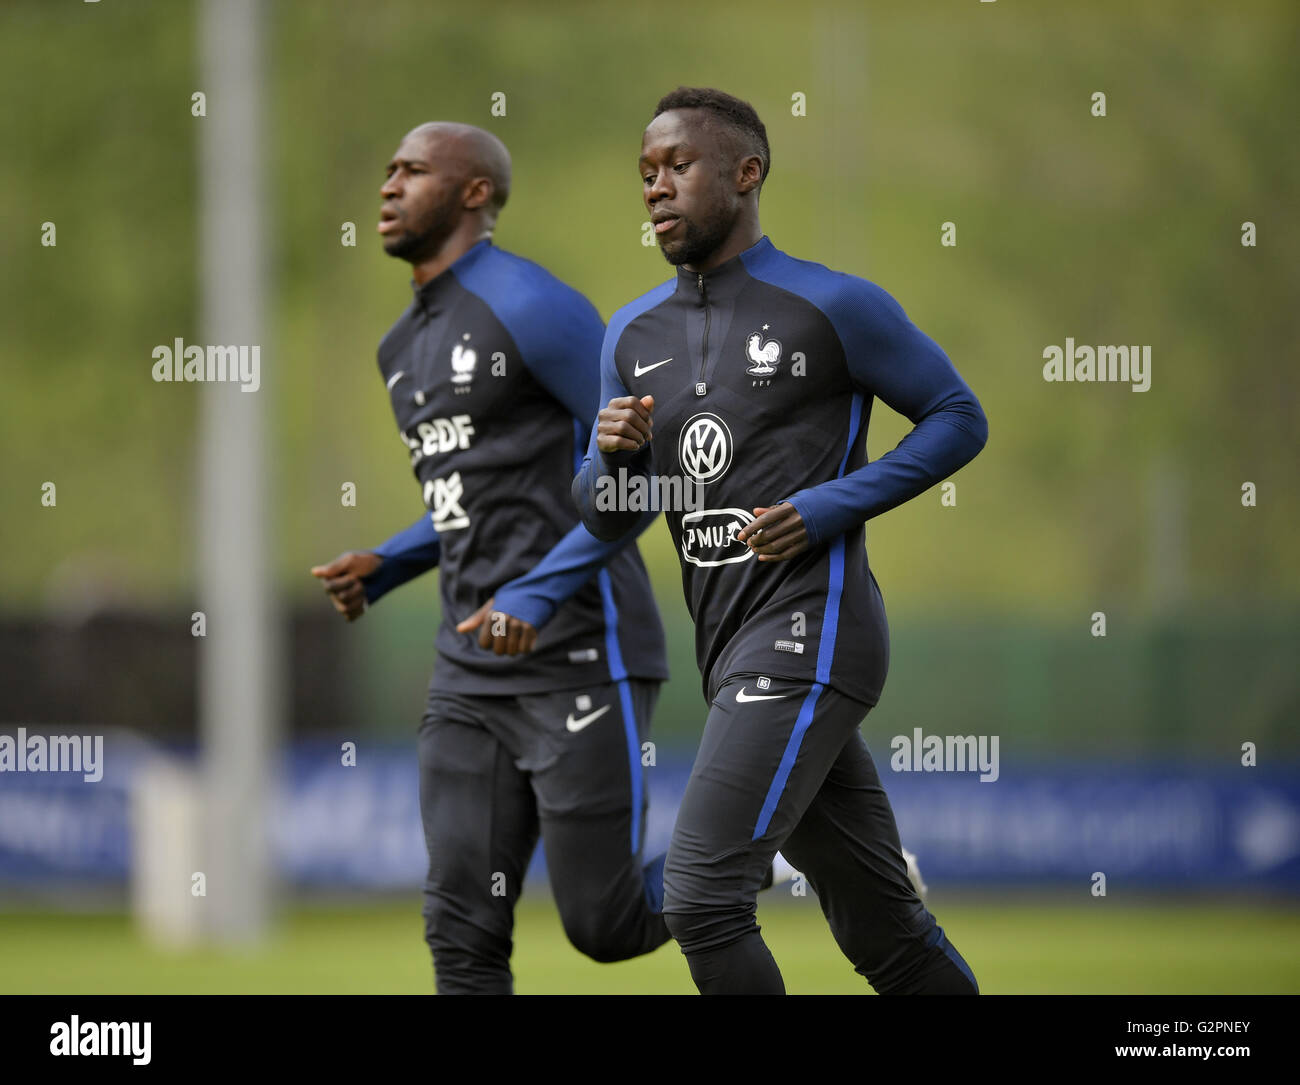 EURO 2016 preparations - impressions of the French training camp on 01 June 2016 in Neustift, Austria. Bacary Sagna (R) Stock Photo